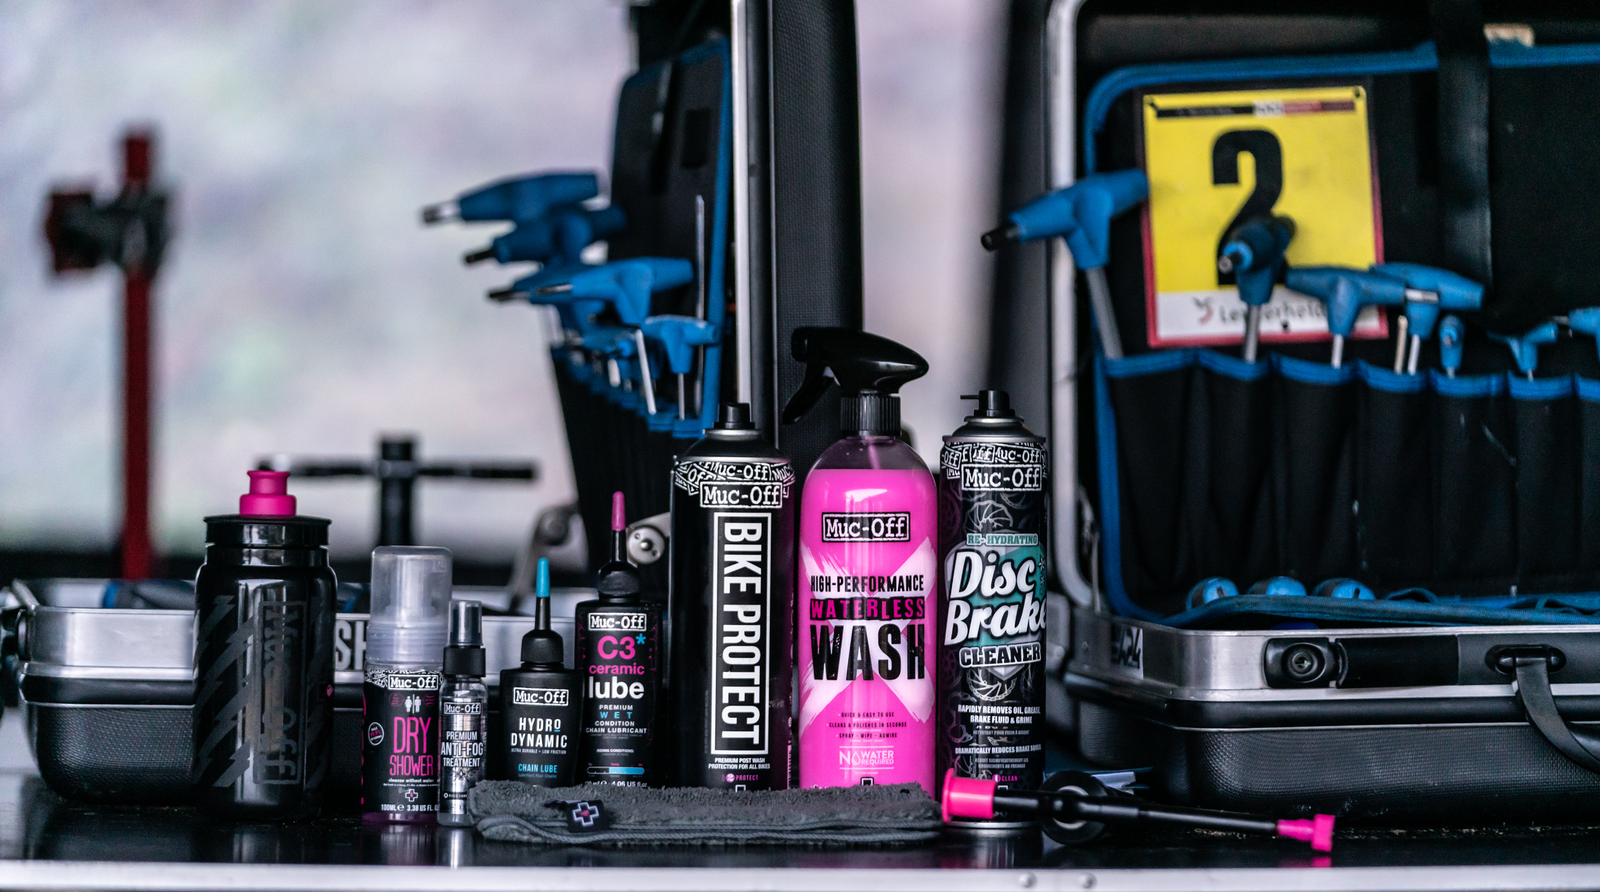 Motorcycle Cleaning Kits & Products - Shop Now